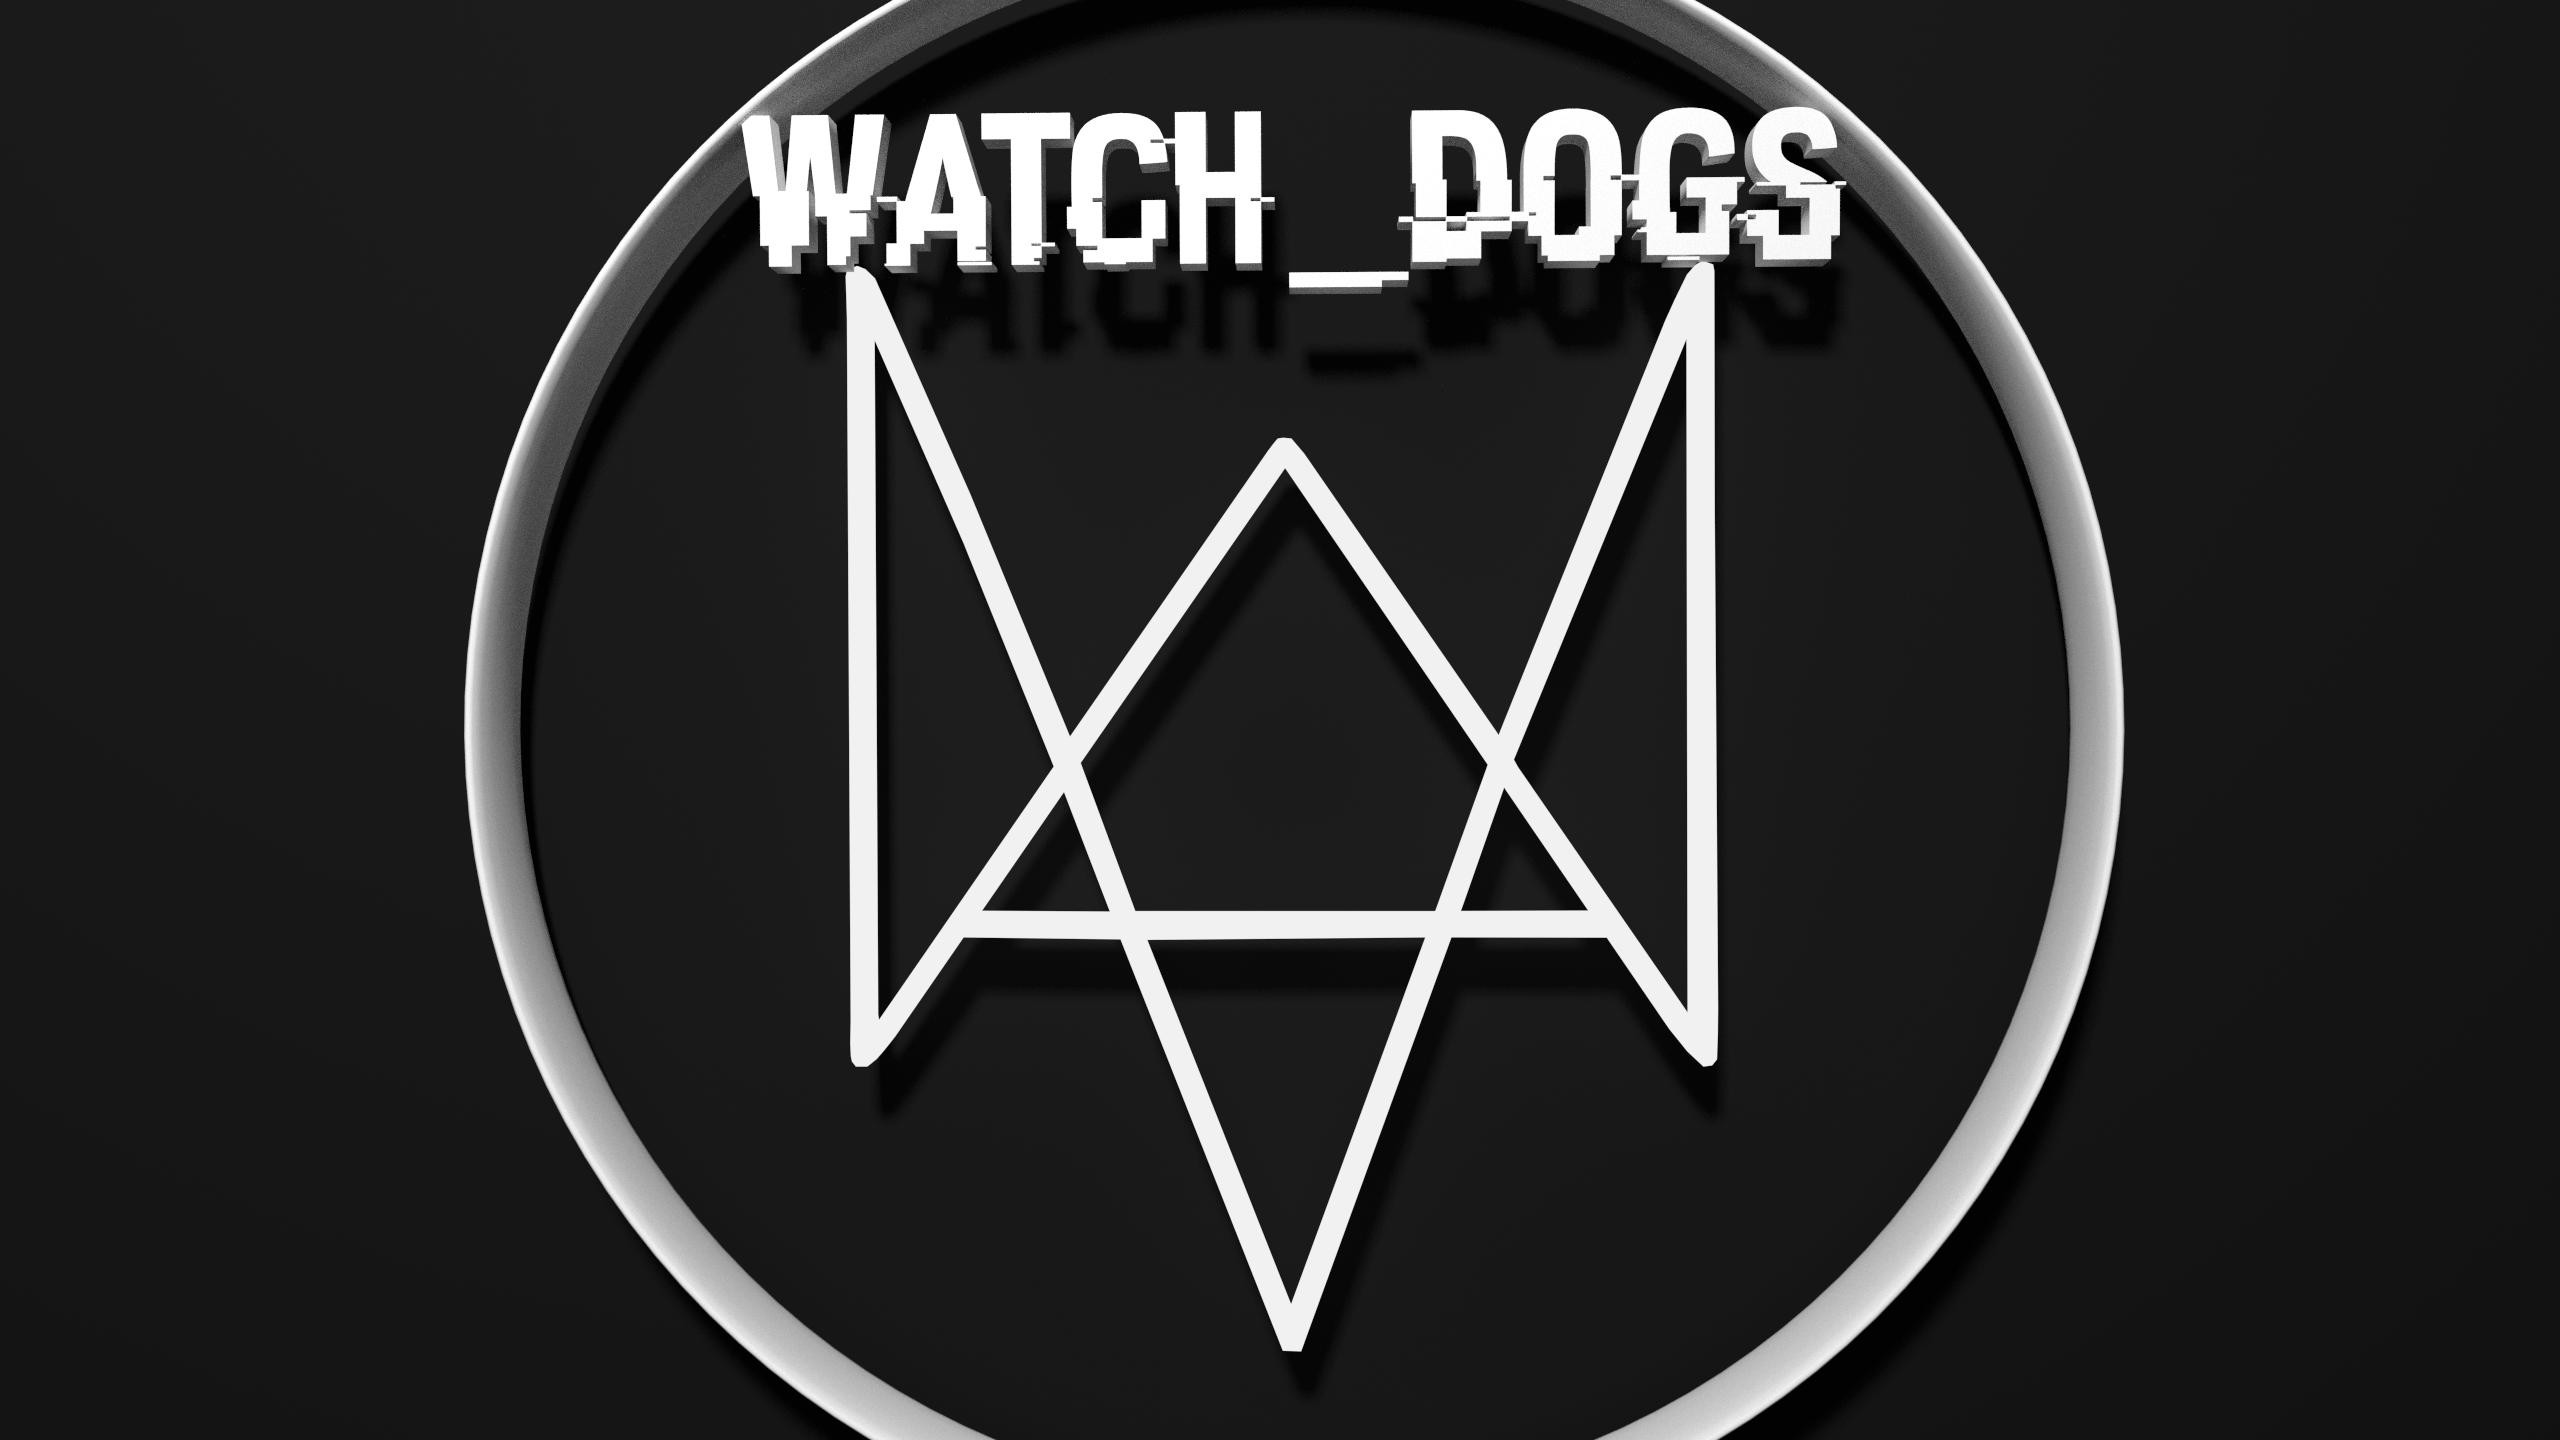 2560x1440 WD1I did this Watch Dogs wallpaper a while back! hope you like it!